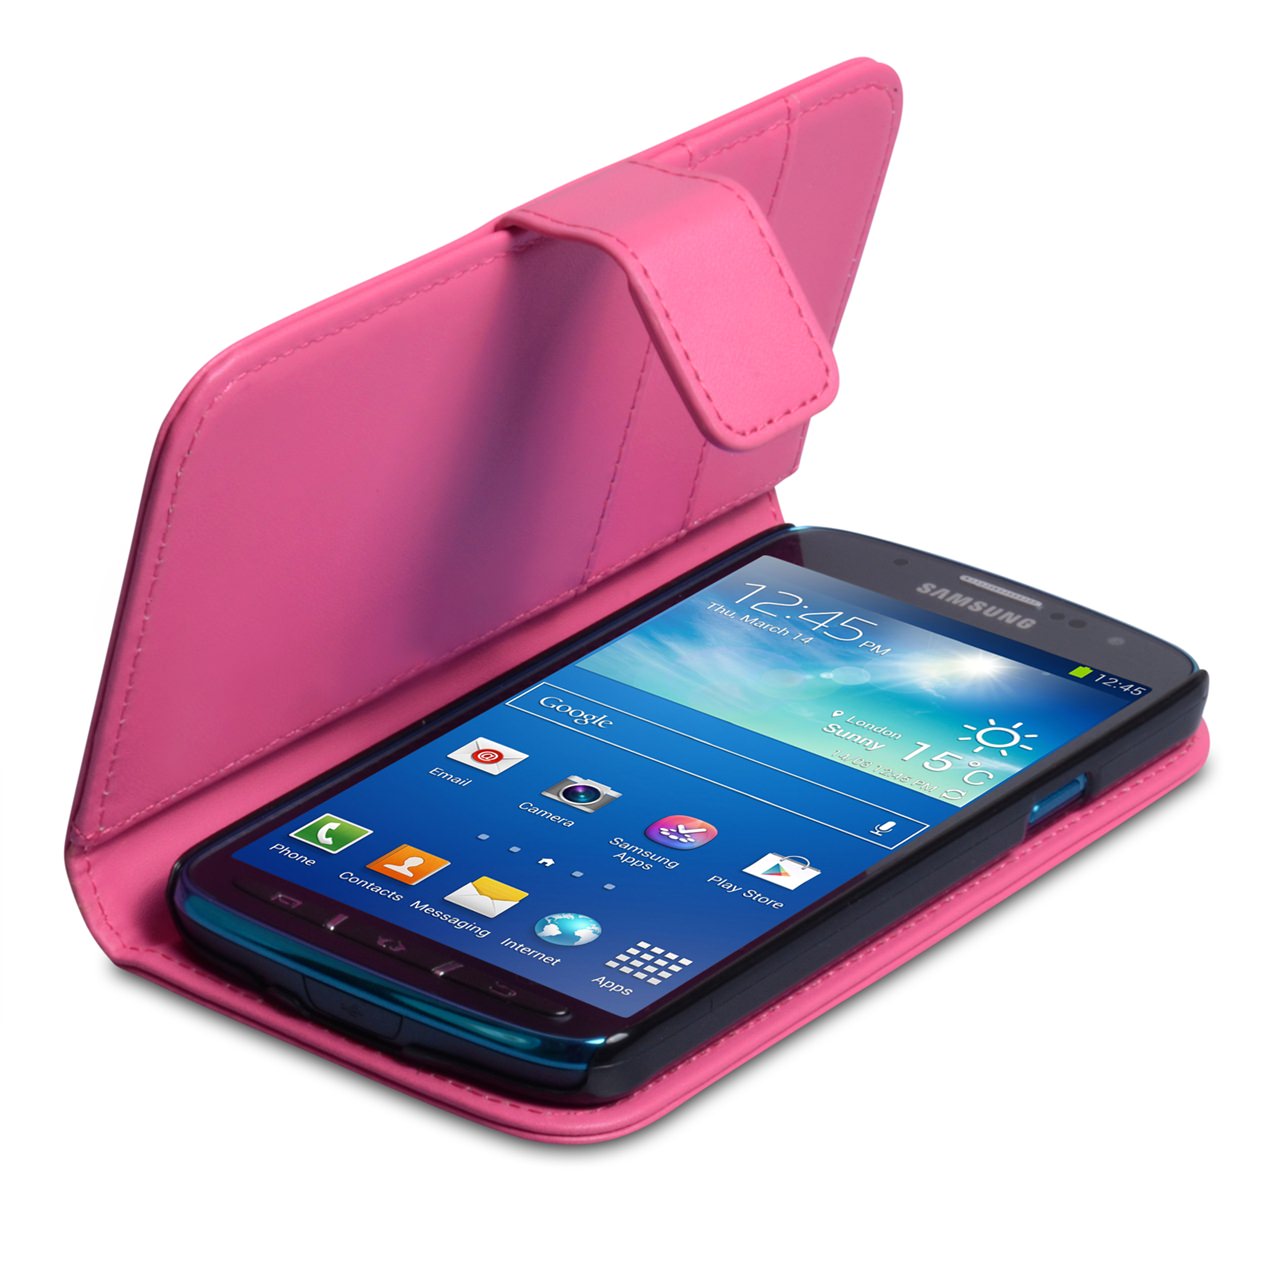 YouSave Samsung Galaxy S4 Active Leather Effect Wallet - Hot Pink